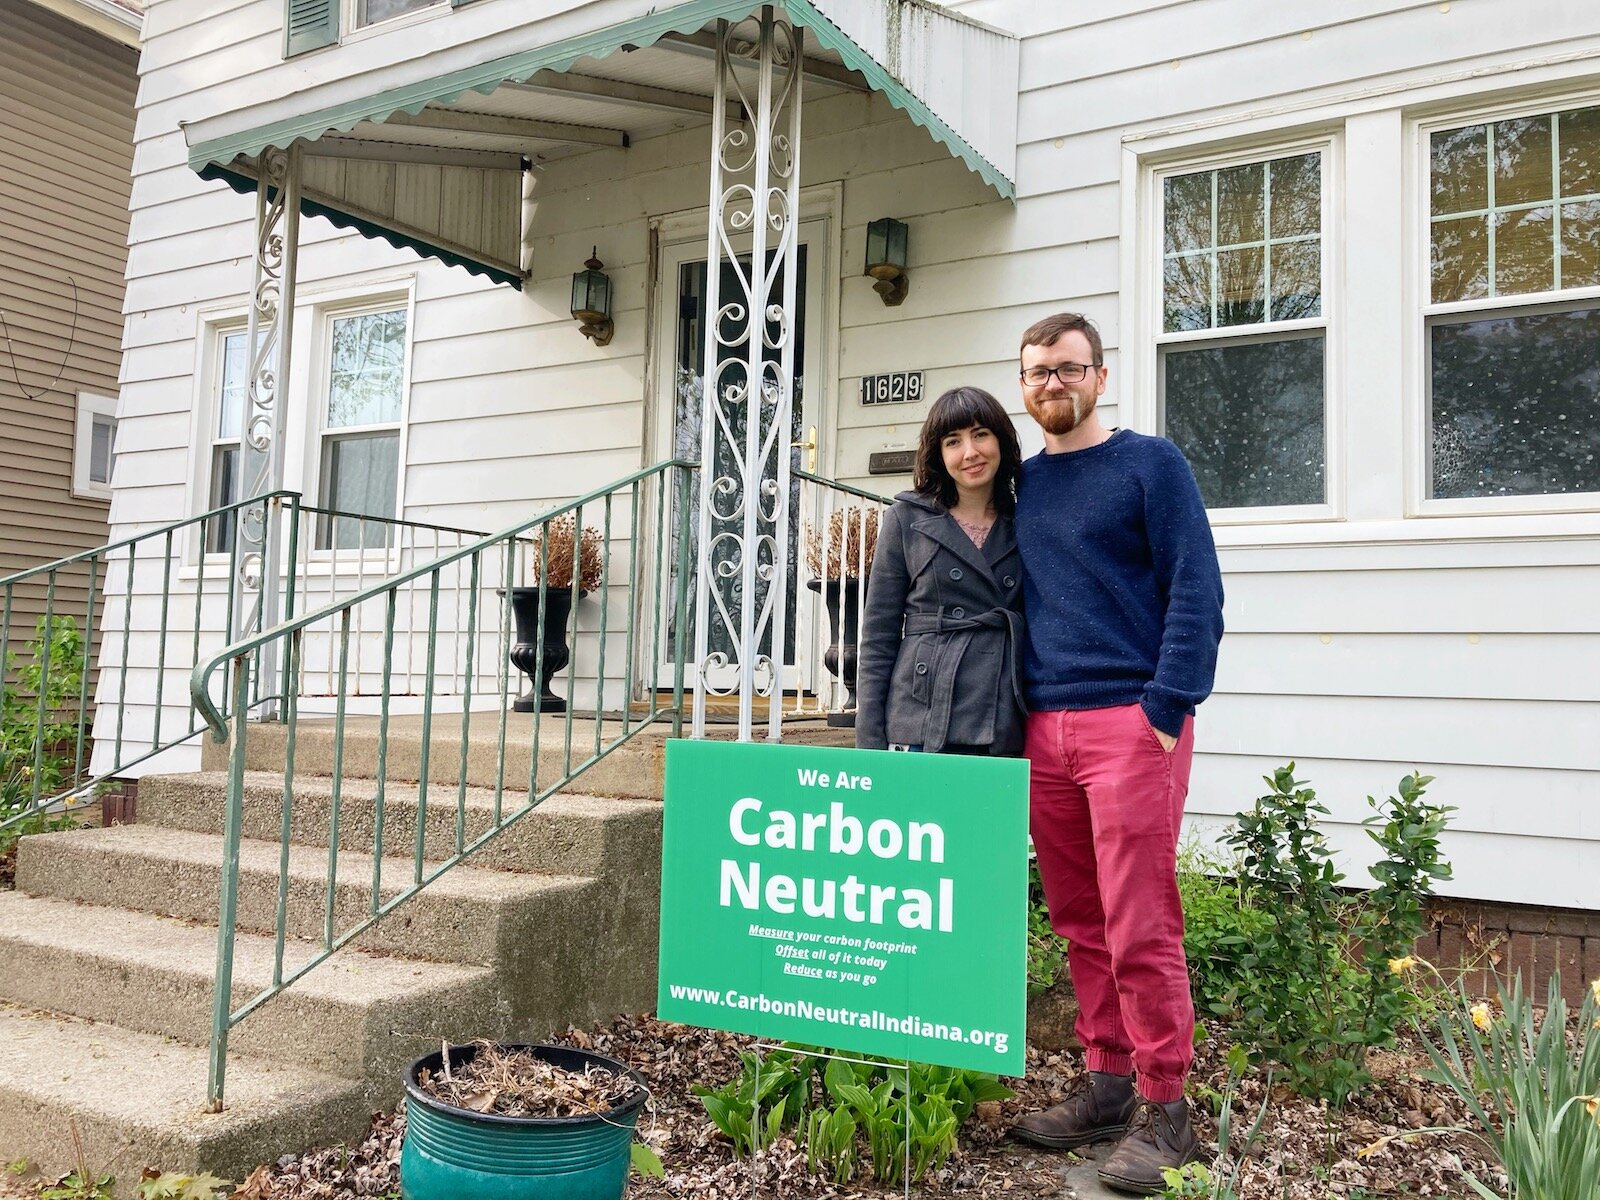 Sarah Suraci and Kurt Roembke of Fort Wayne enrolled in Carbon Neutral Indiana in January 2021.